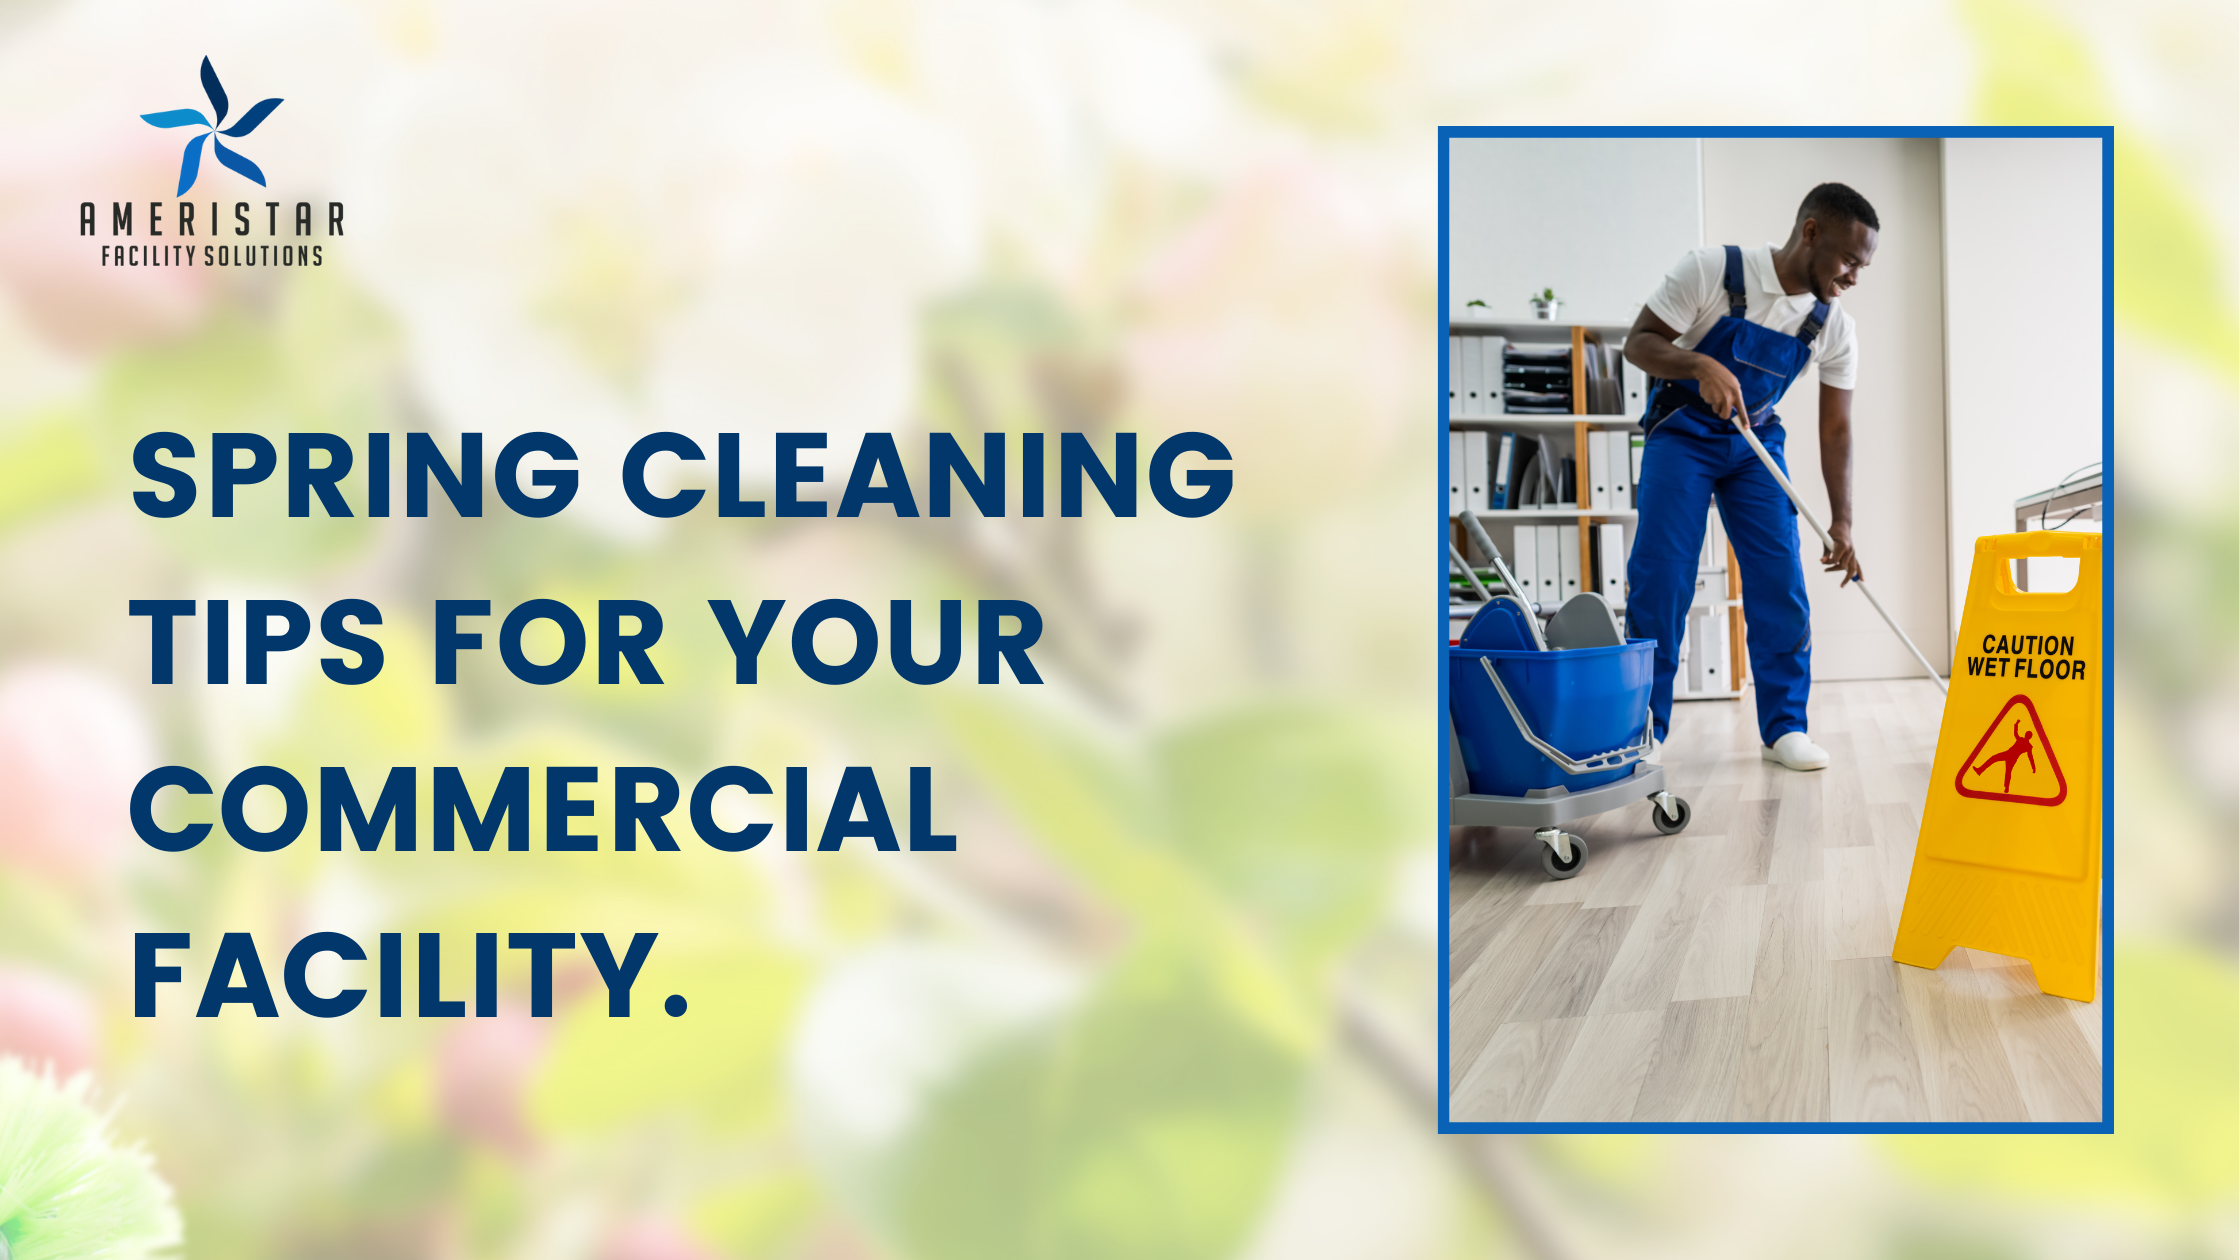 Spring Cleaning Tips for Your Commercial Facility